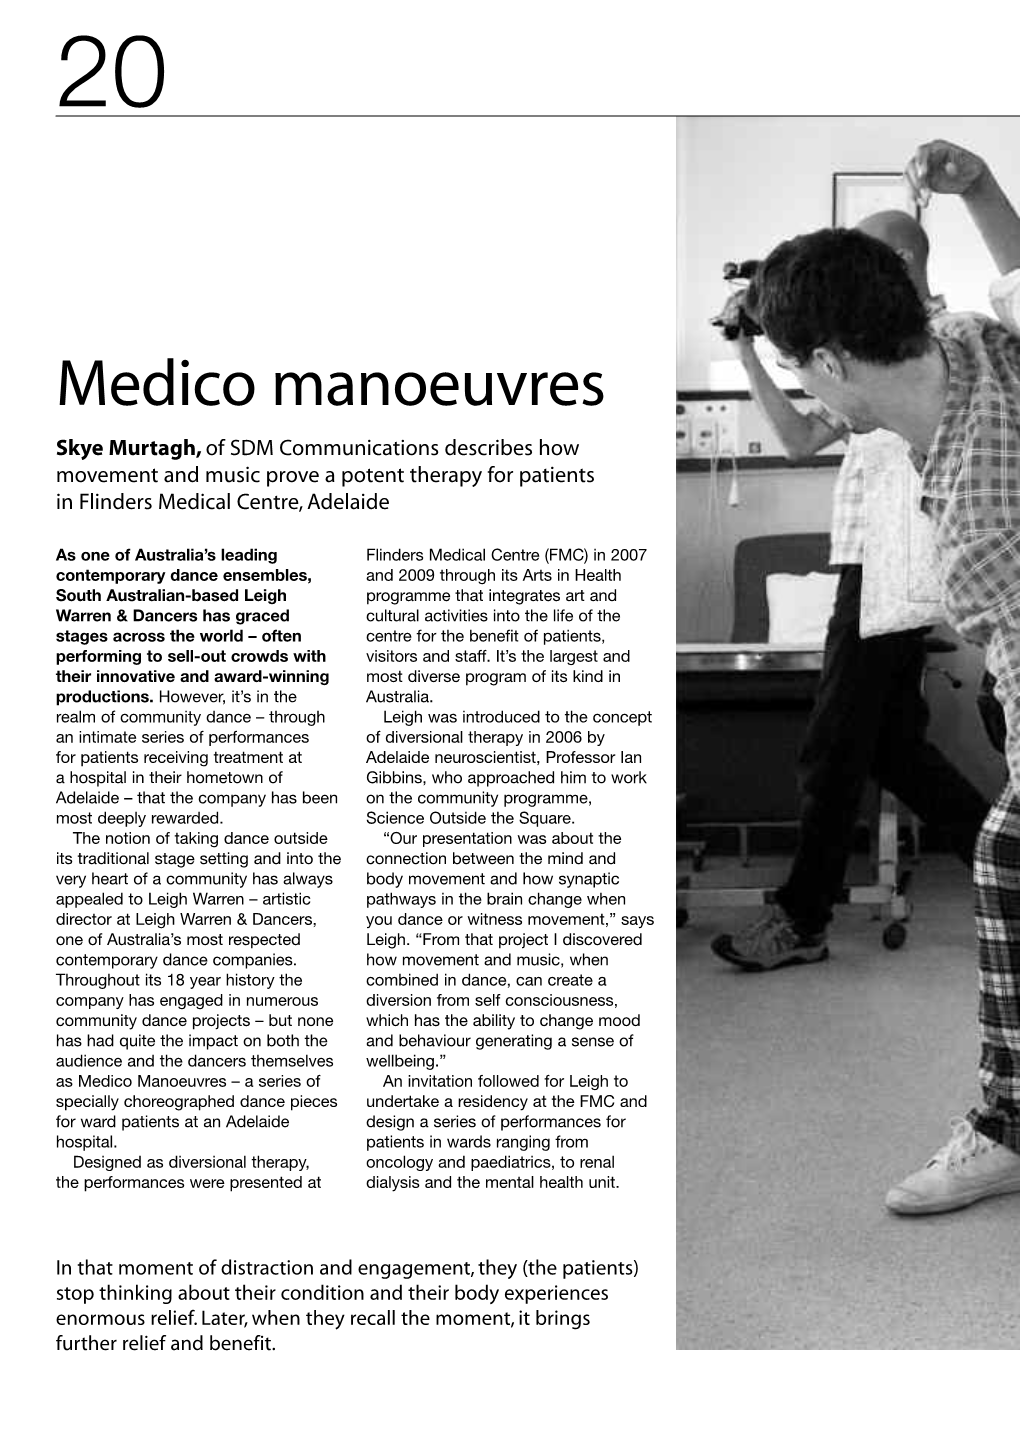 Medico Manoeuvres Skye Murtagh, of SDM Communications Describes How Movement and Music Prove a Potent Therapy for Patients in Flinders Medical Centre, Adelaide